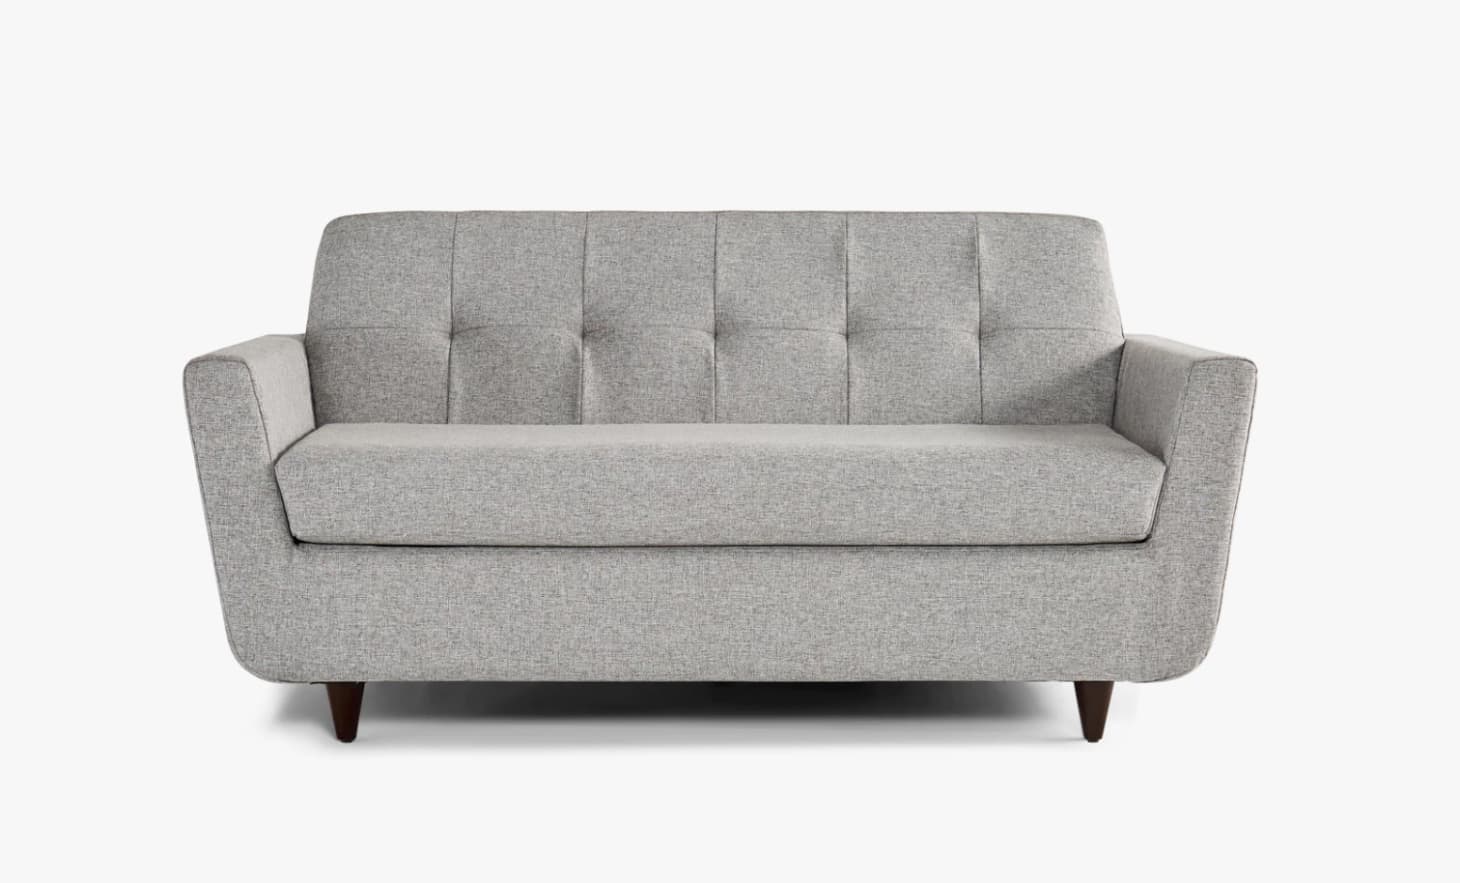 Modern Sleeper Loveseats For Small Spaces with Simple Decor